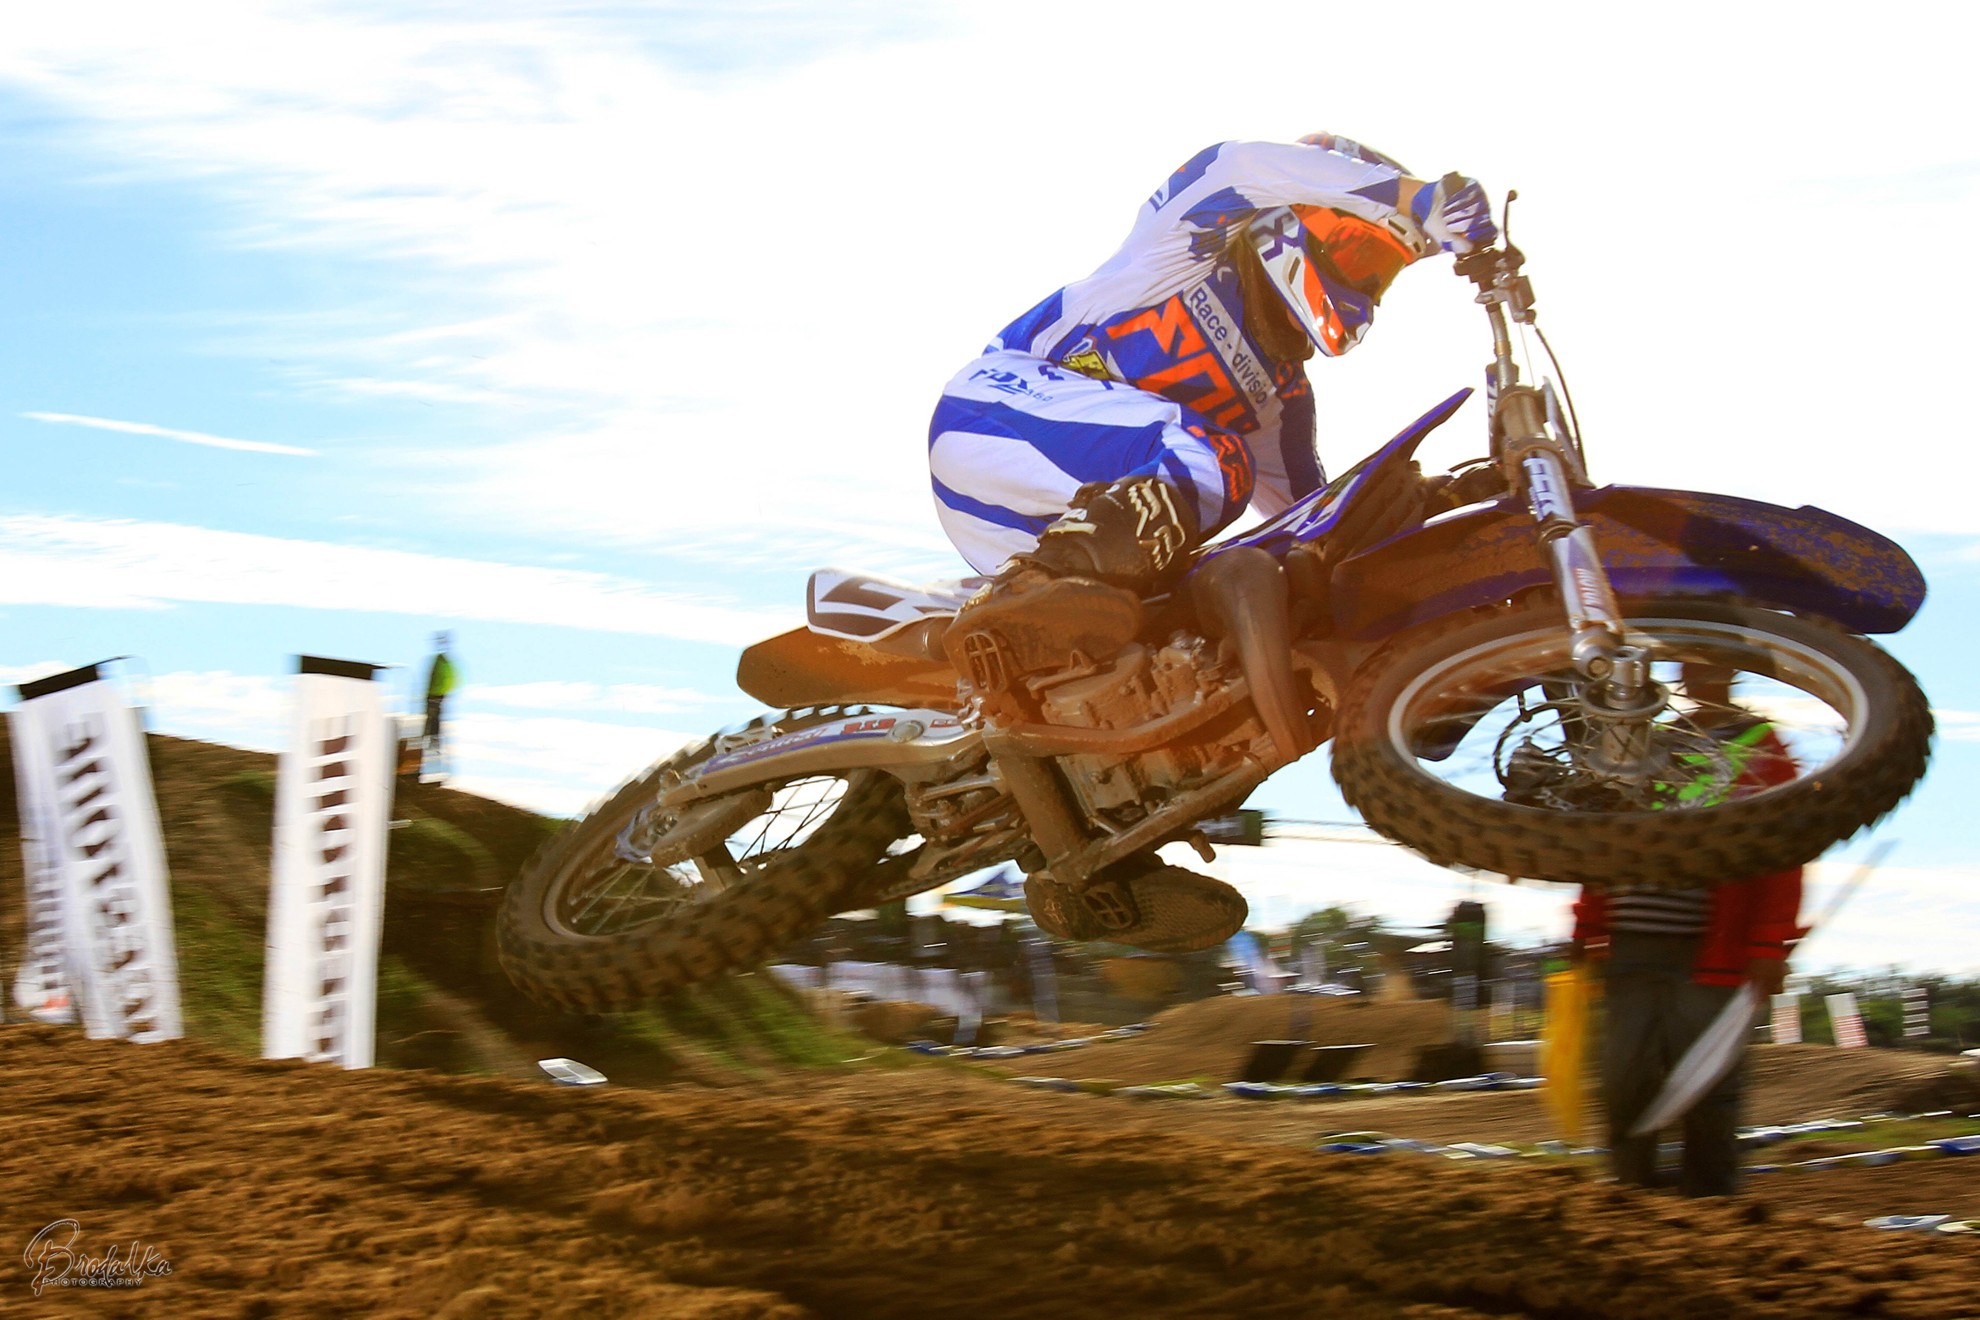 Injury cuts short promising young MX rider’s 2014 national championship campaign